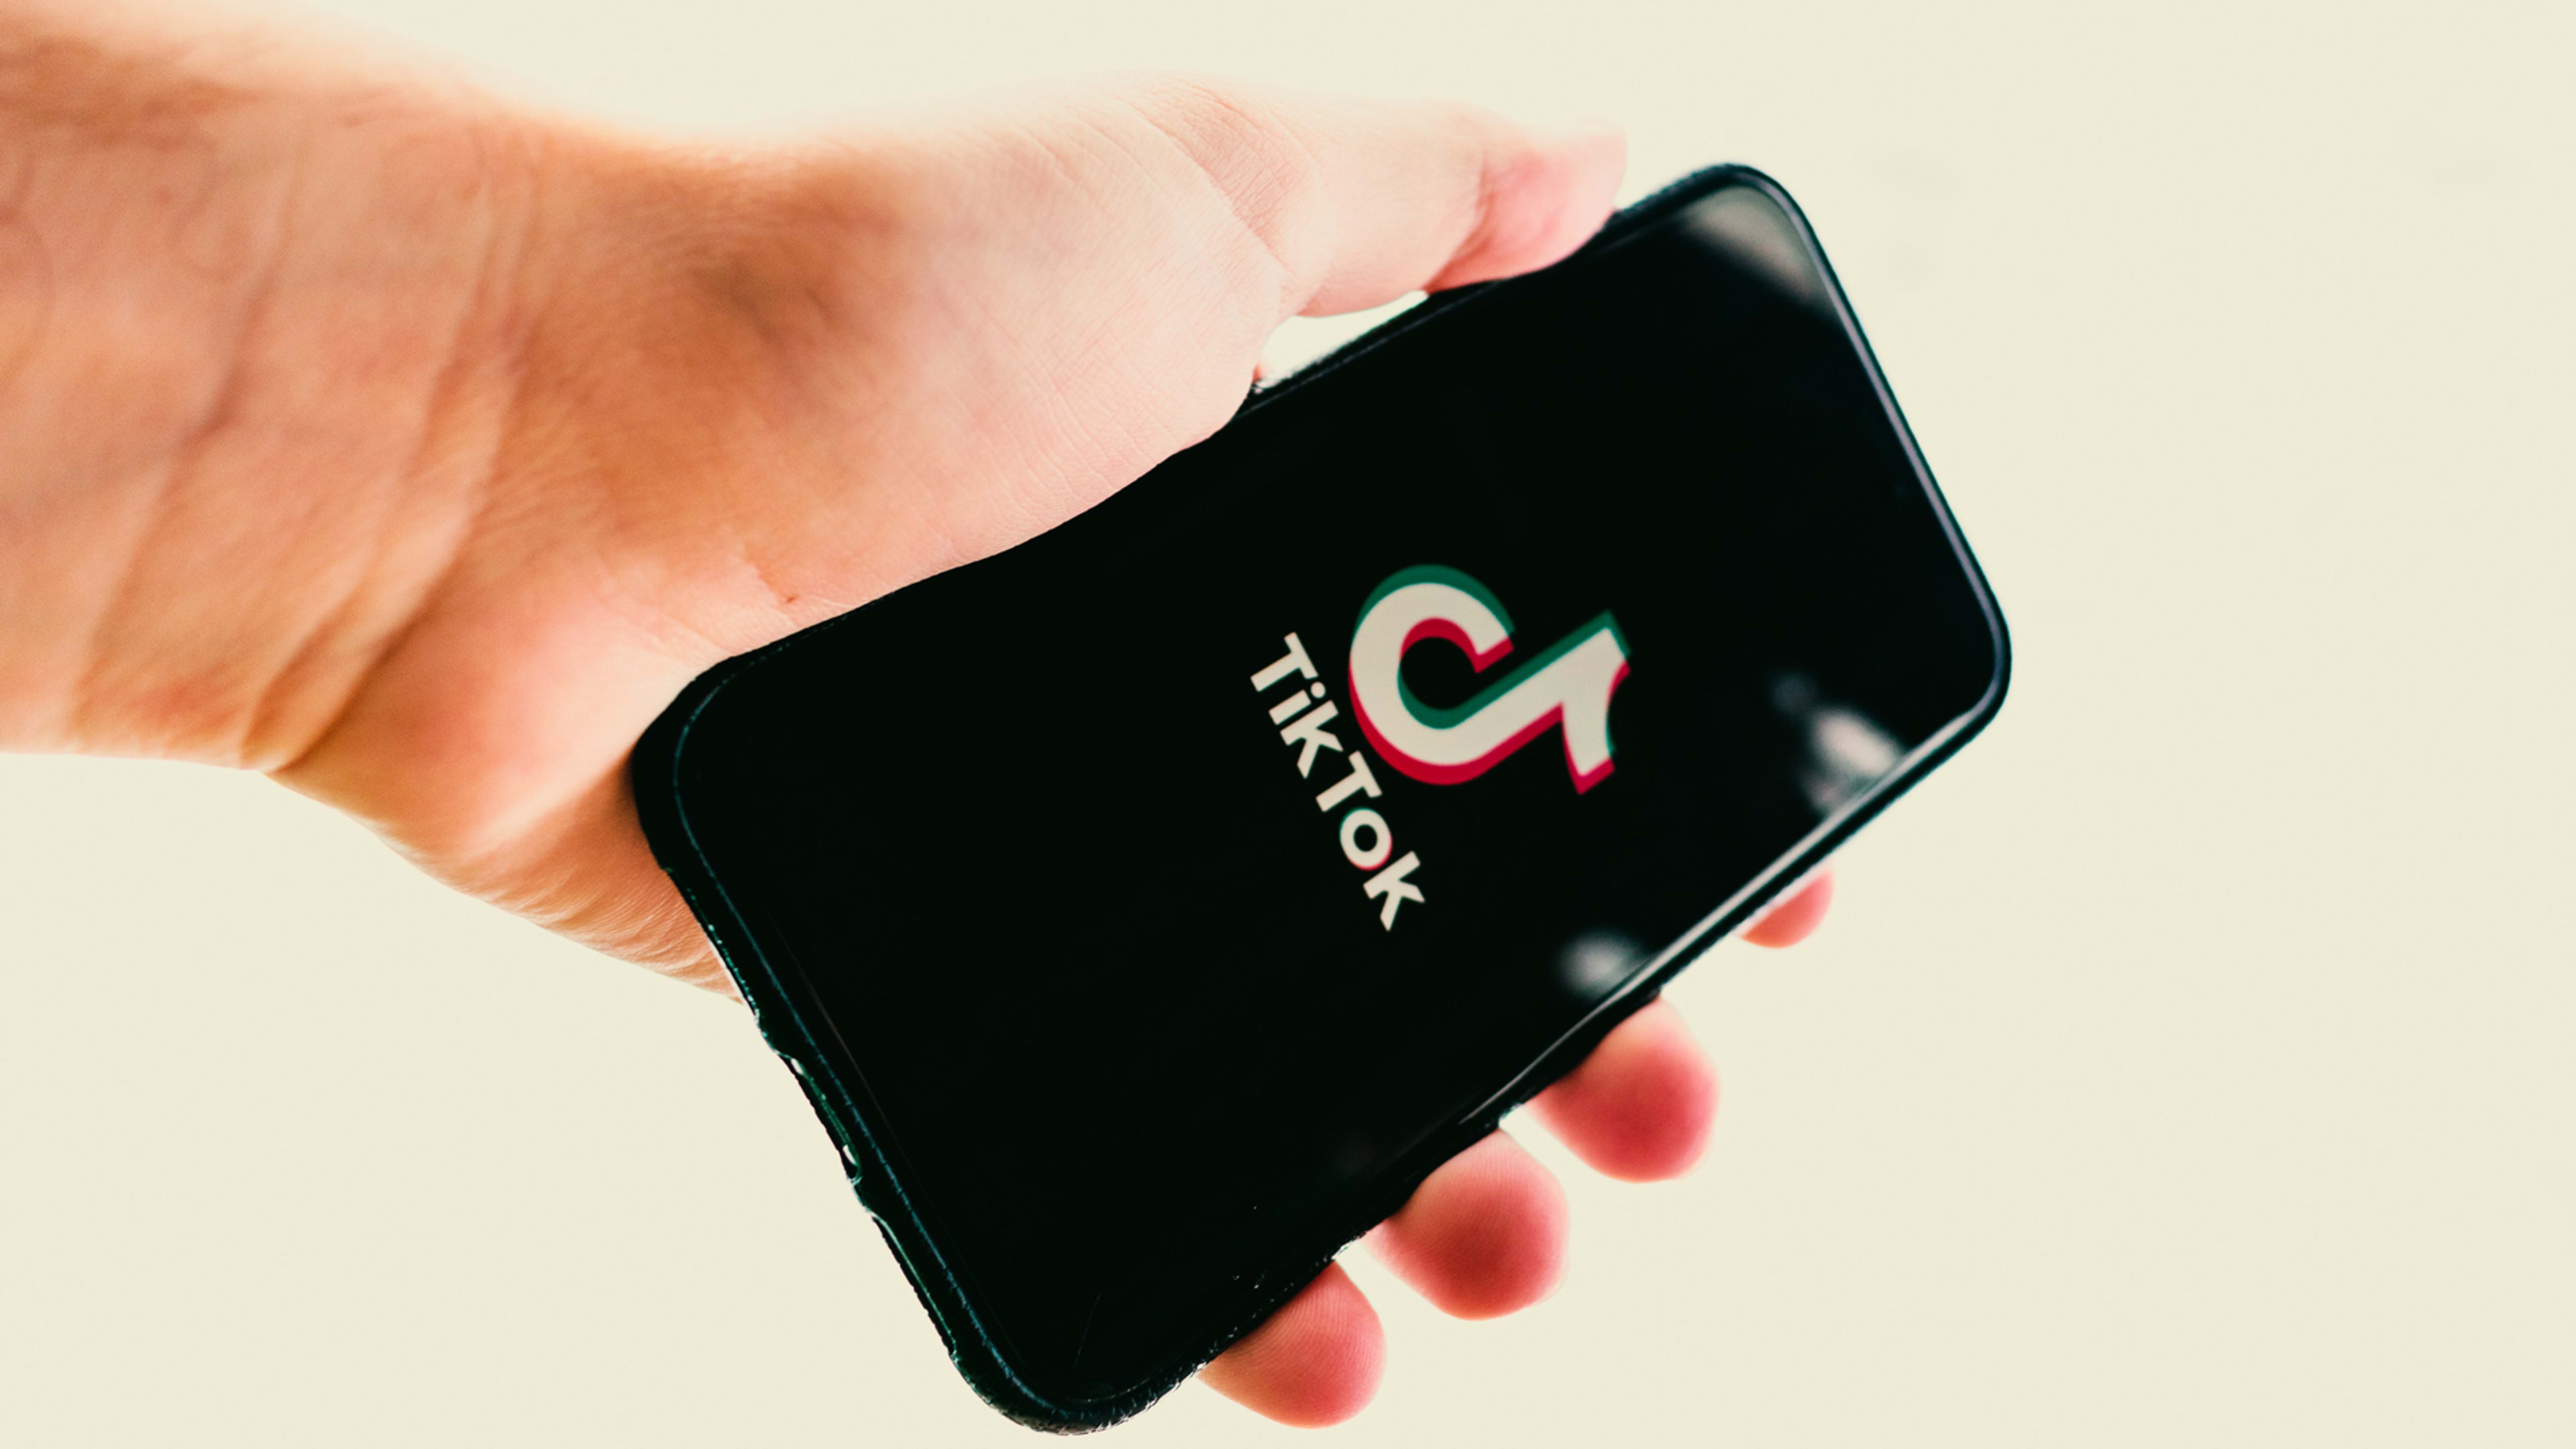 Why is TikTok getting banned? Here’s the latest update as the U.S. mulls app shutdown